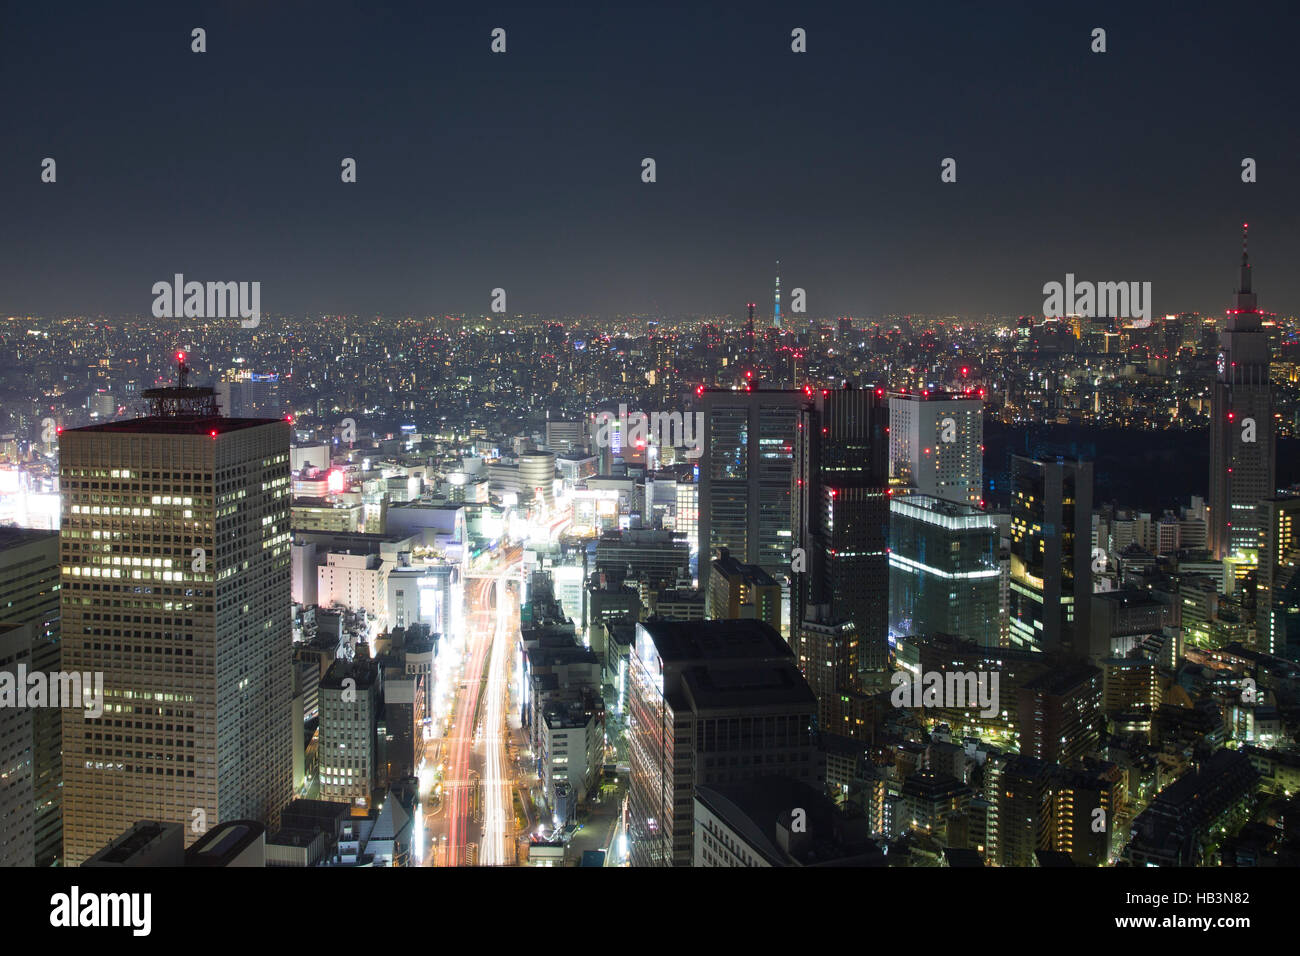 Incredible aerial view of Tokyo by night, Japan 2013 Stock Photo